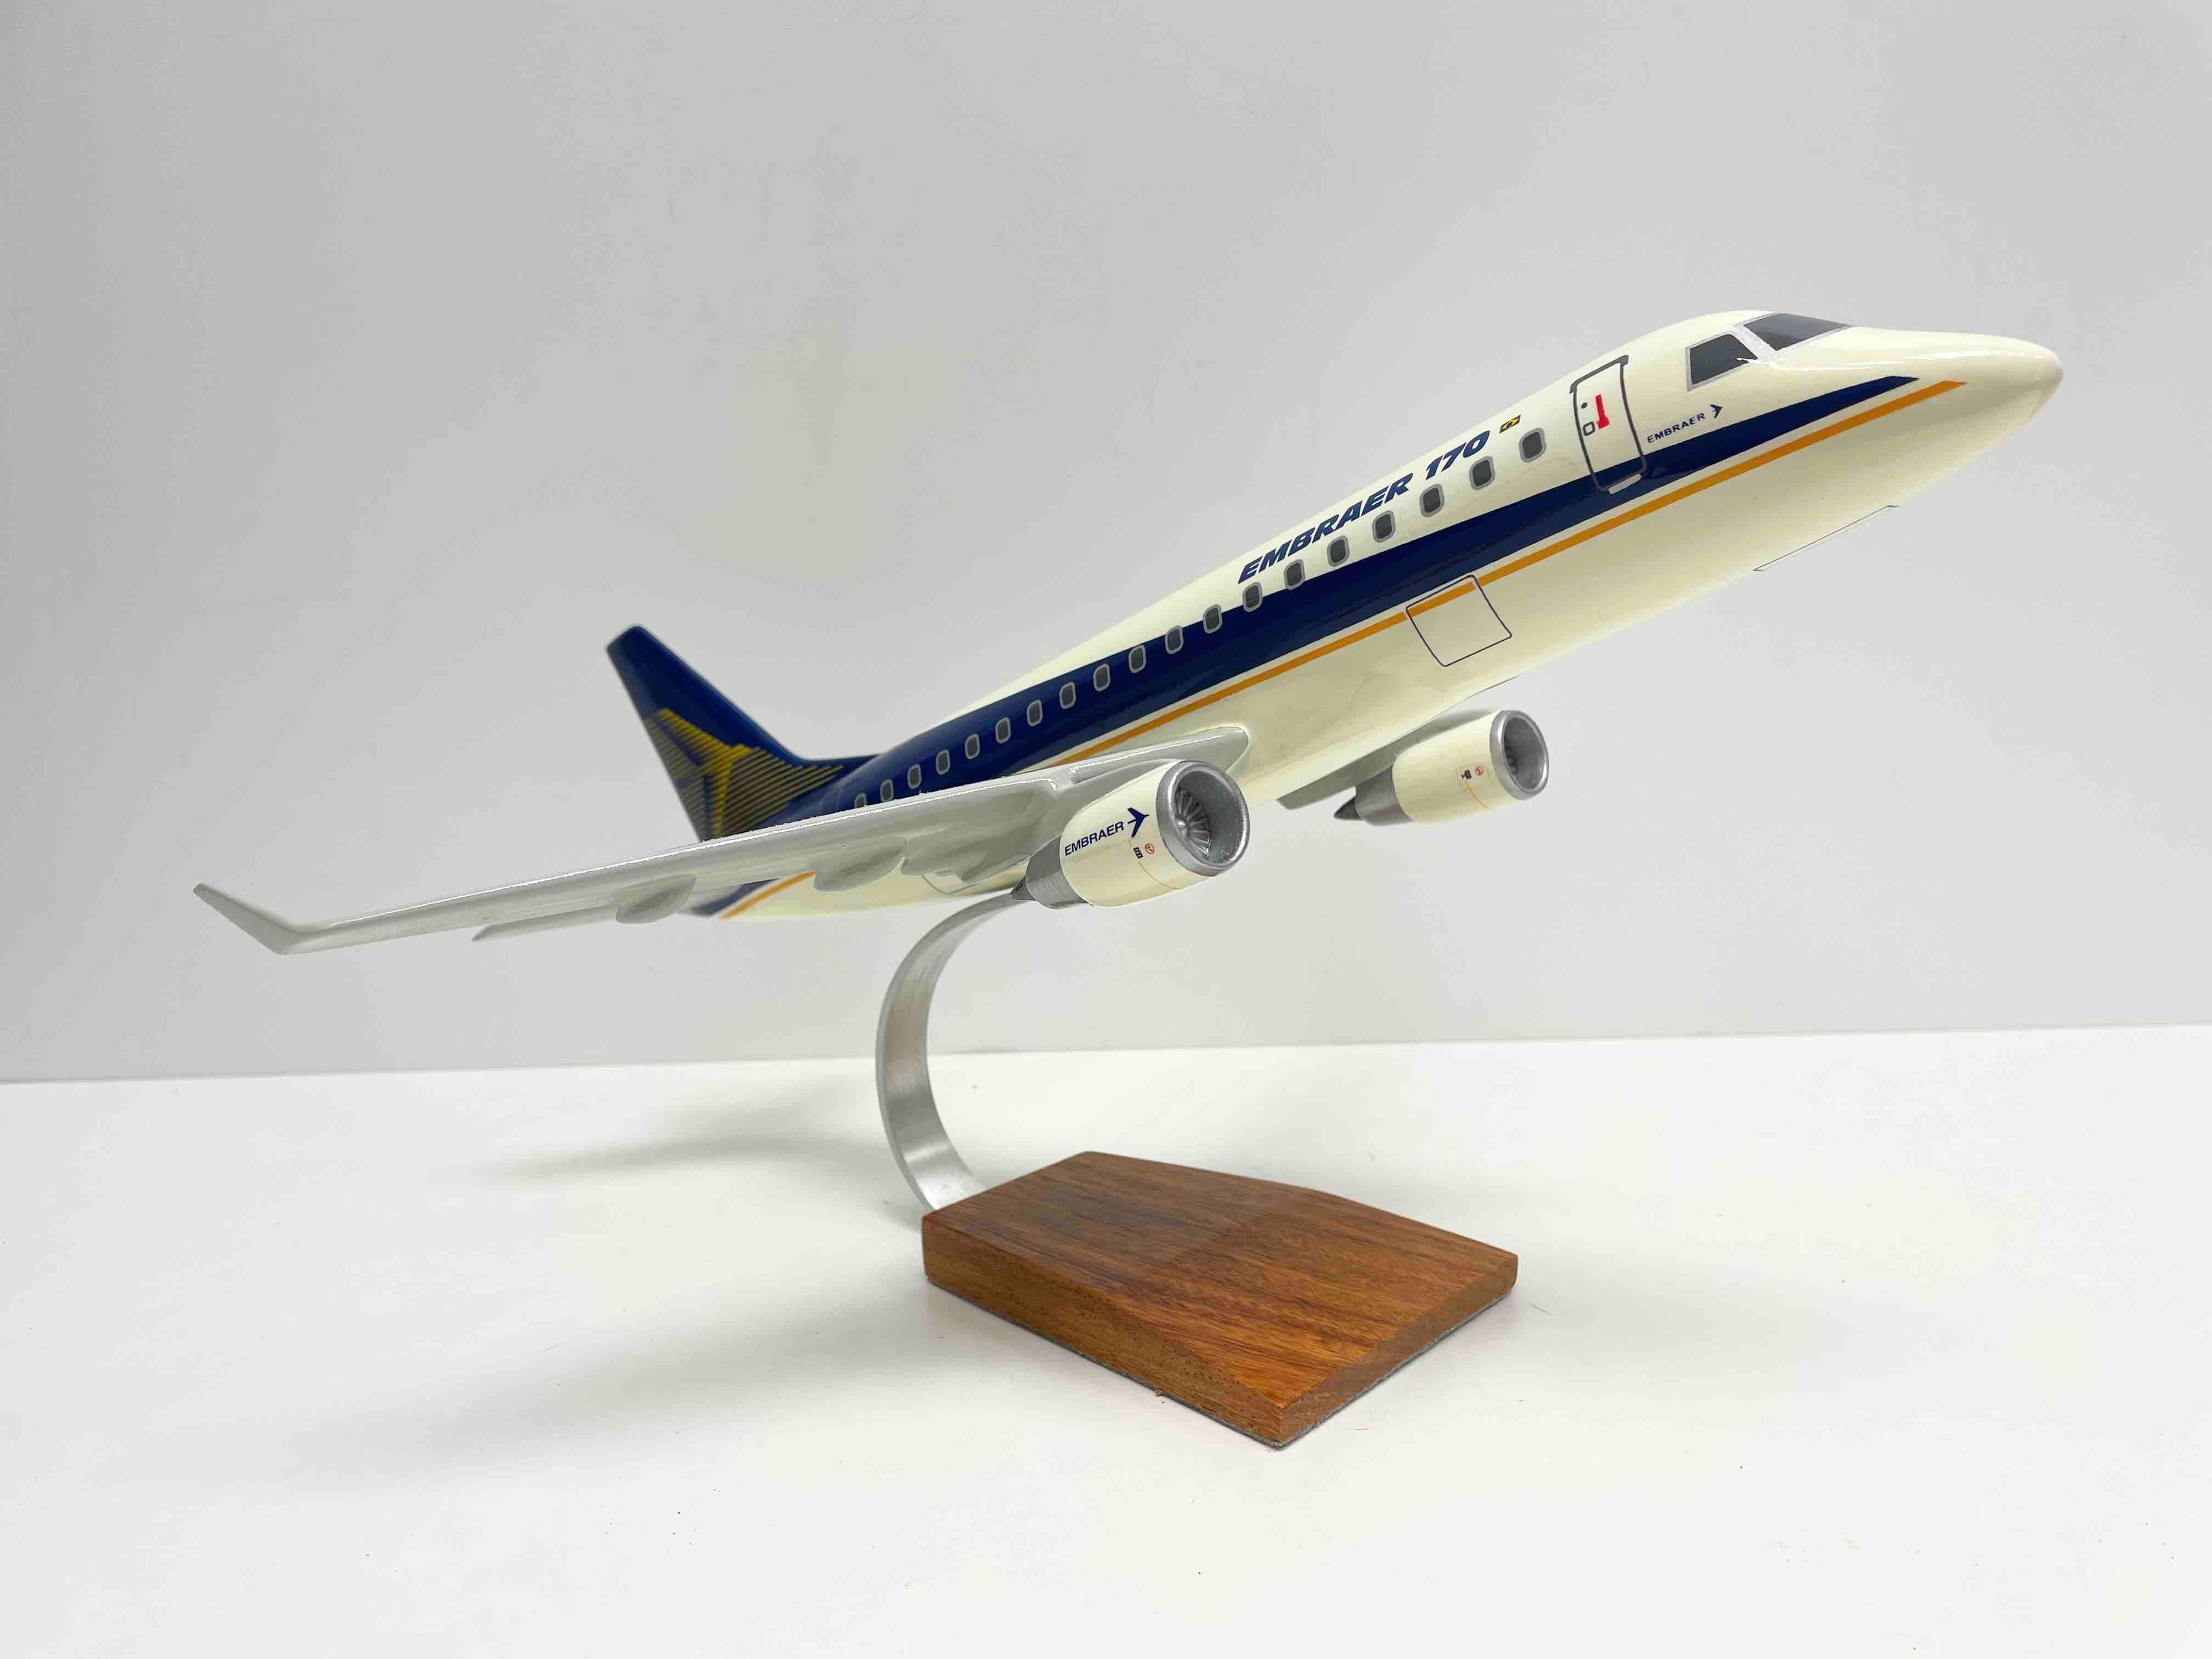 Brazilian Embraer 170 Jet Airplane Aircraft Model Brazil For Sale